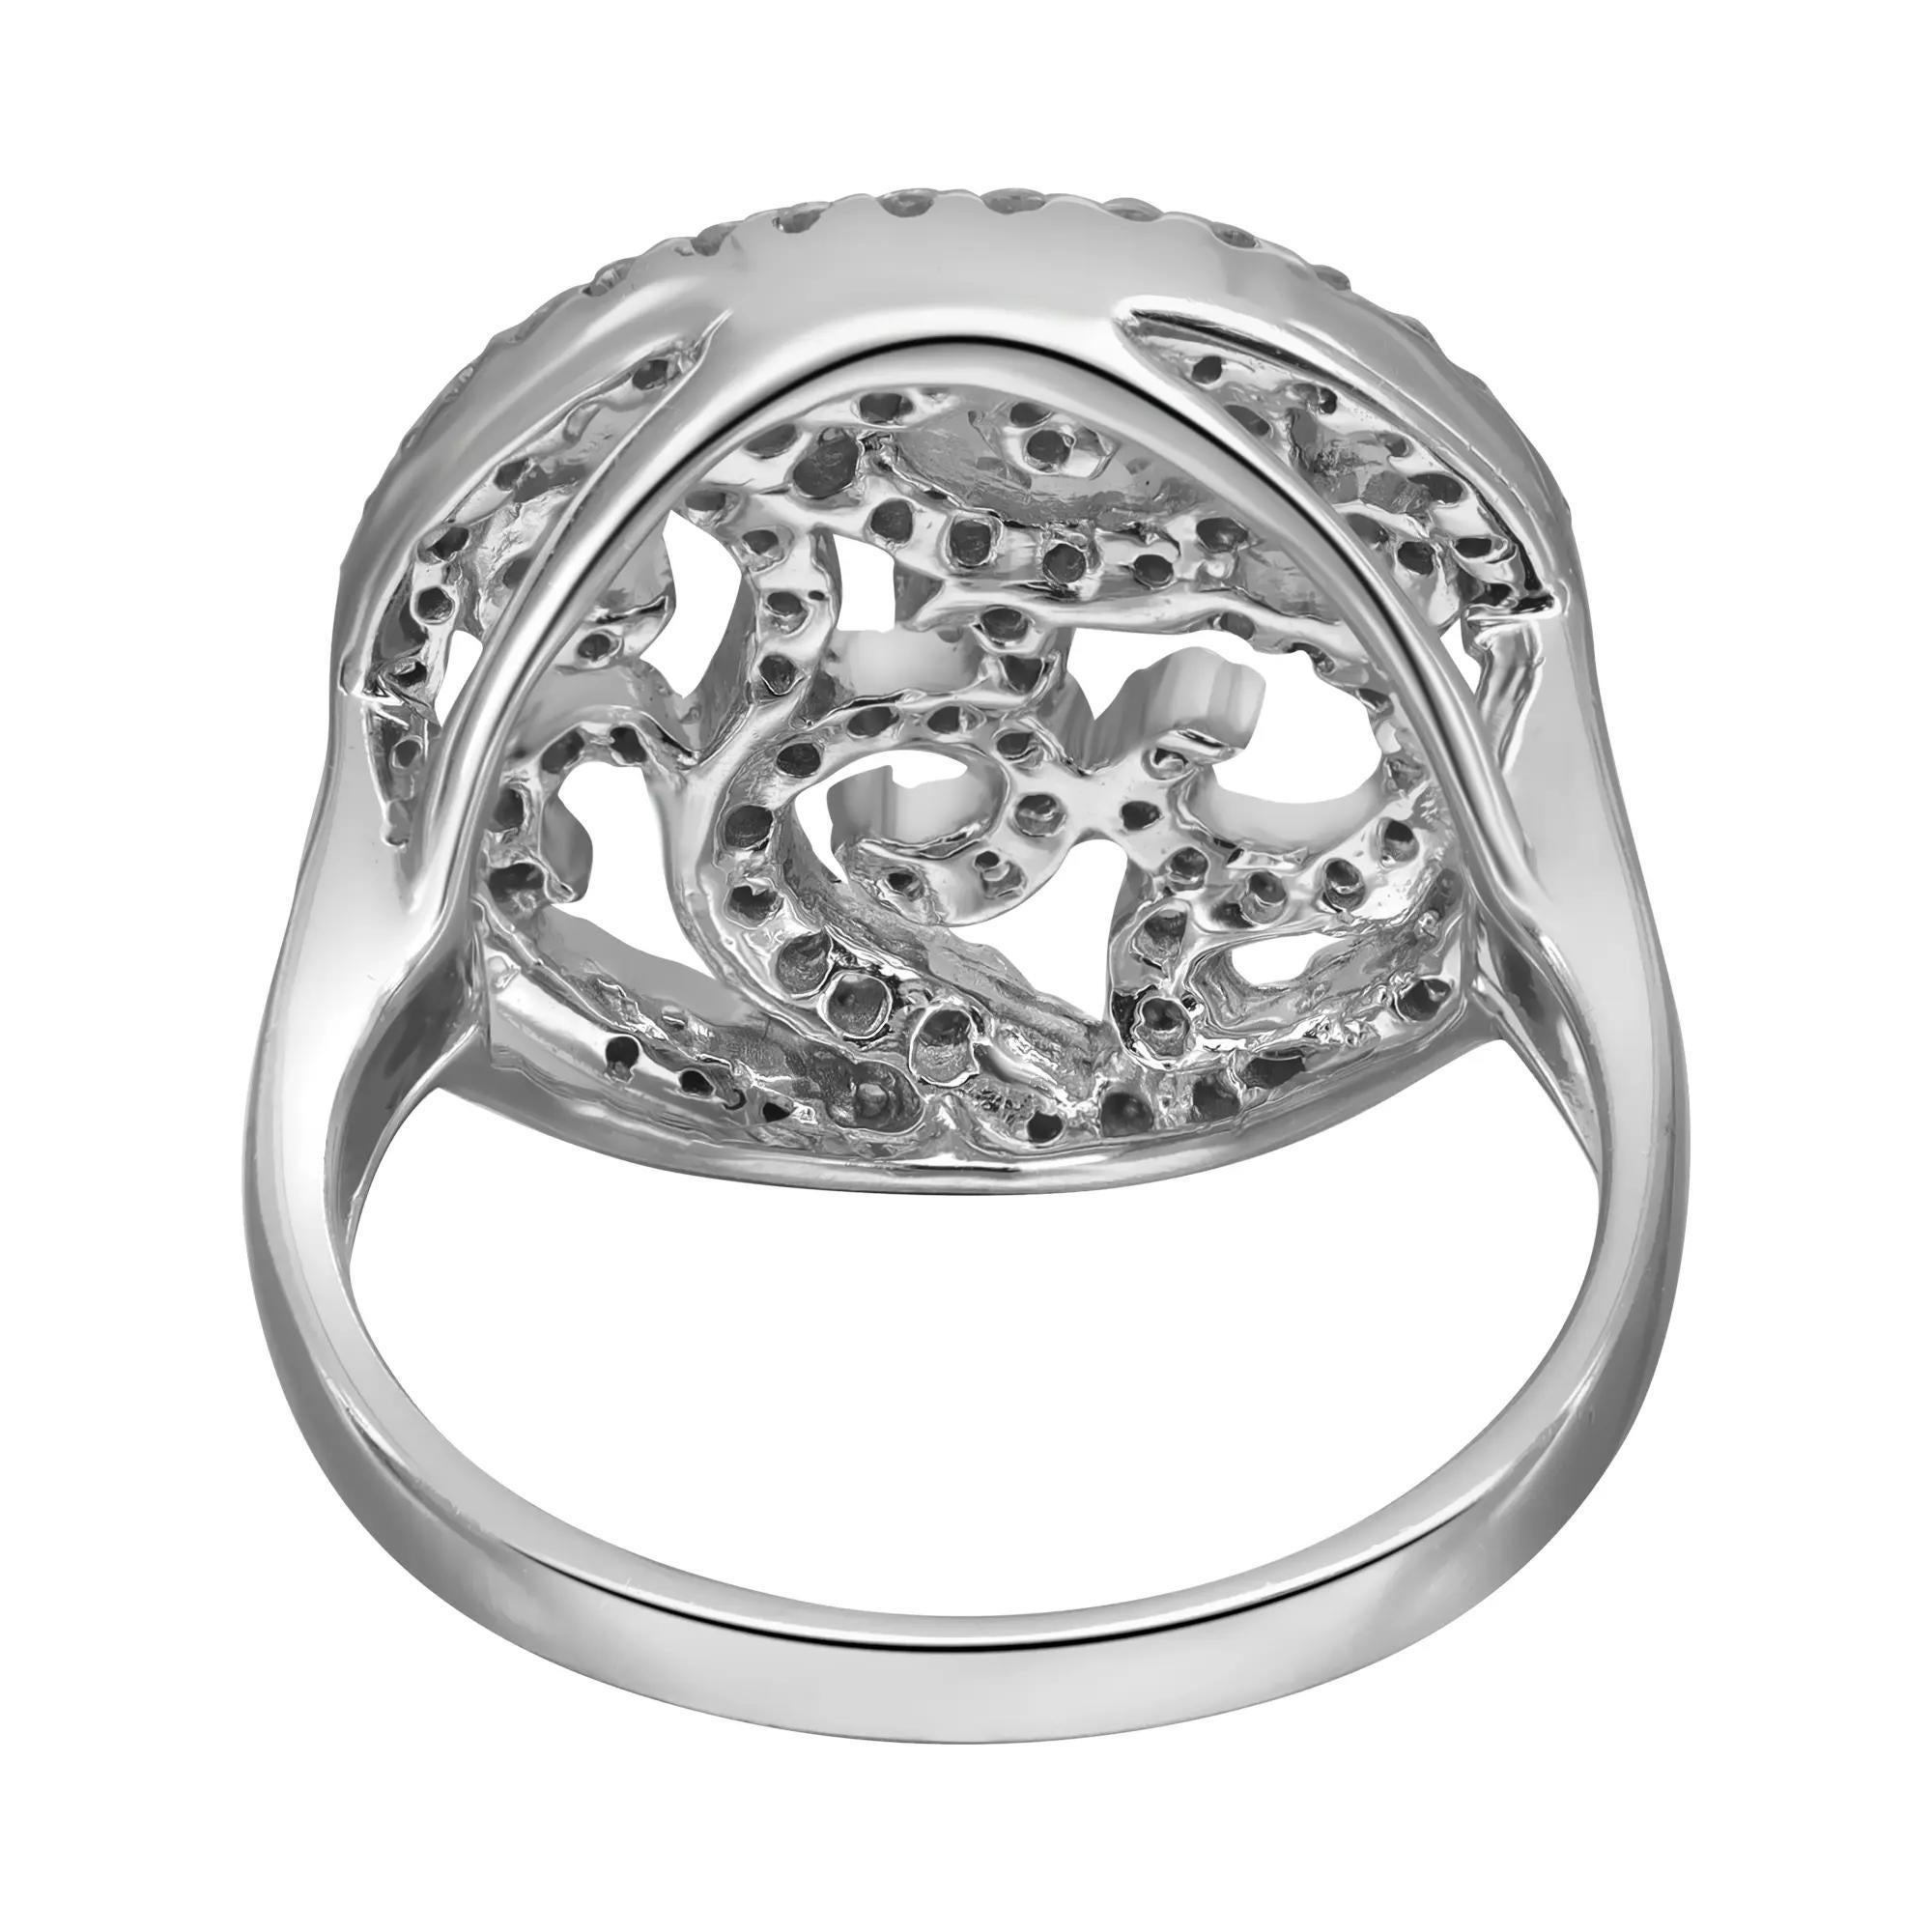 Round Cut 0.76cttw Prong Set Round Diamond Circular Cocktail Ring 14k White Gold Size 7.5 For Sale